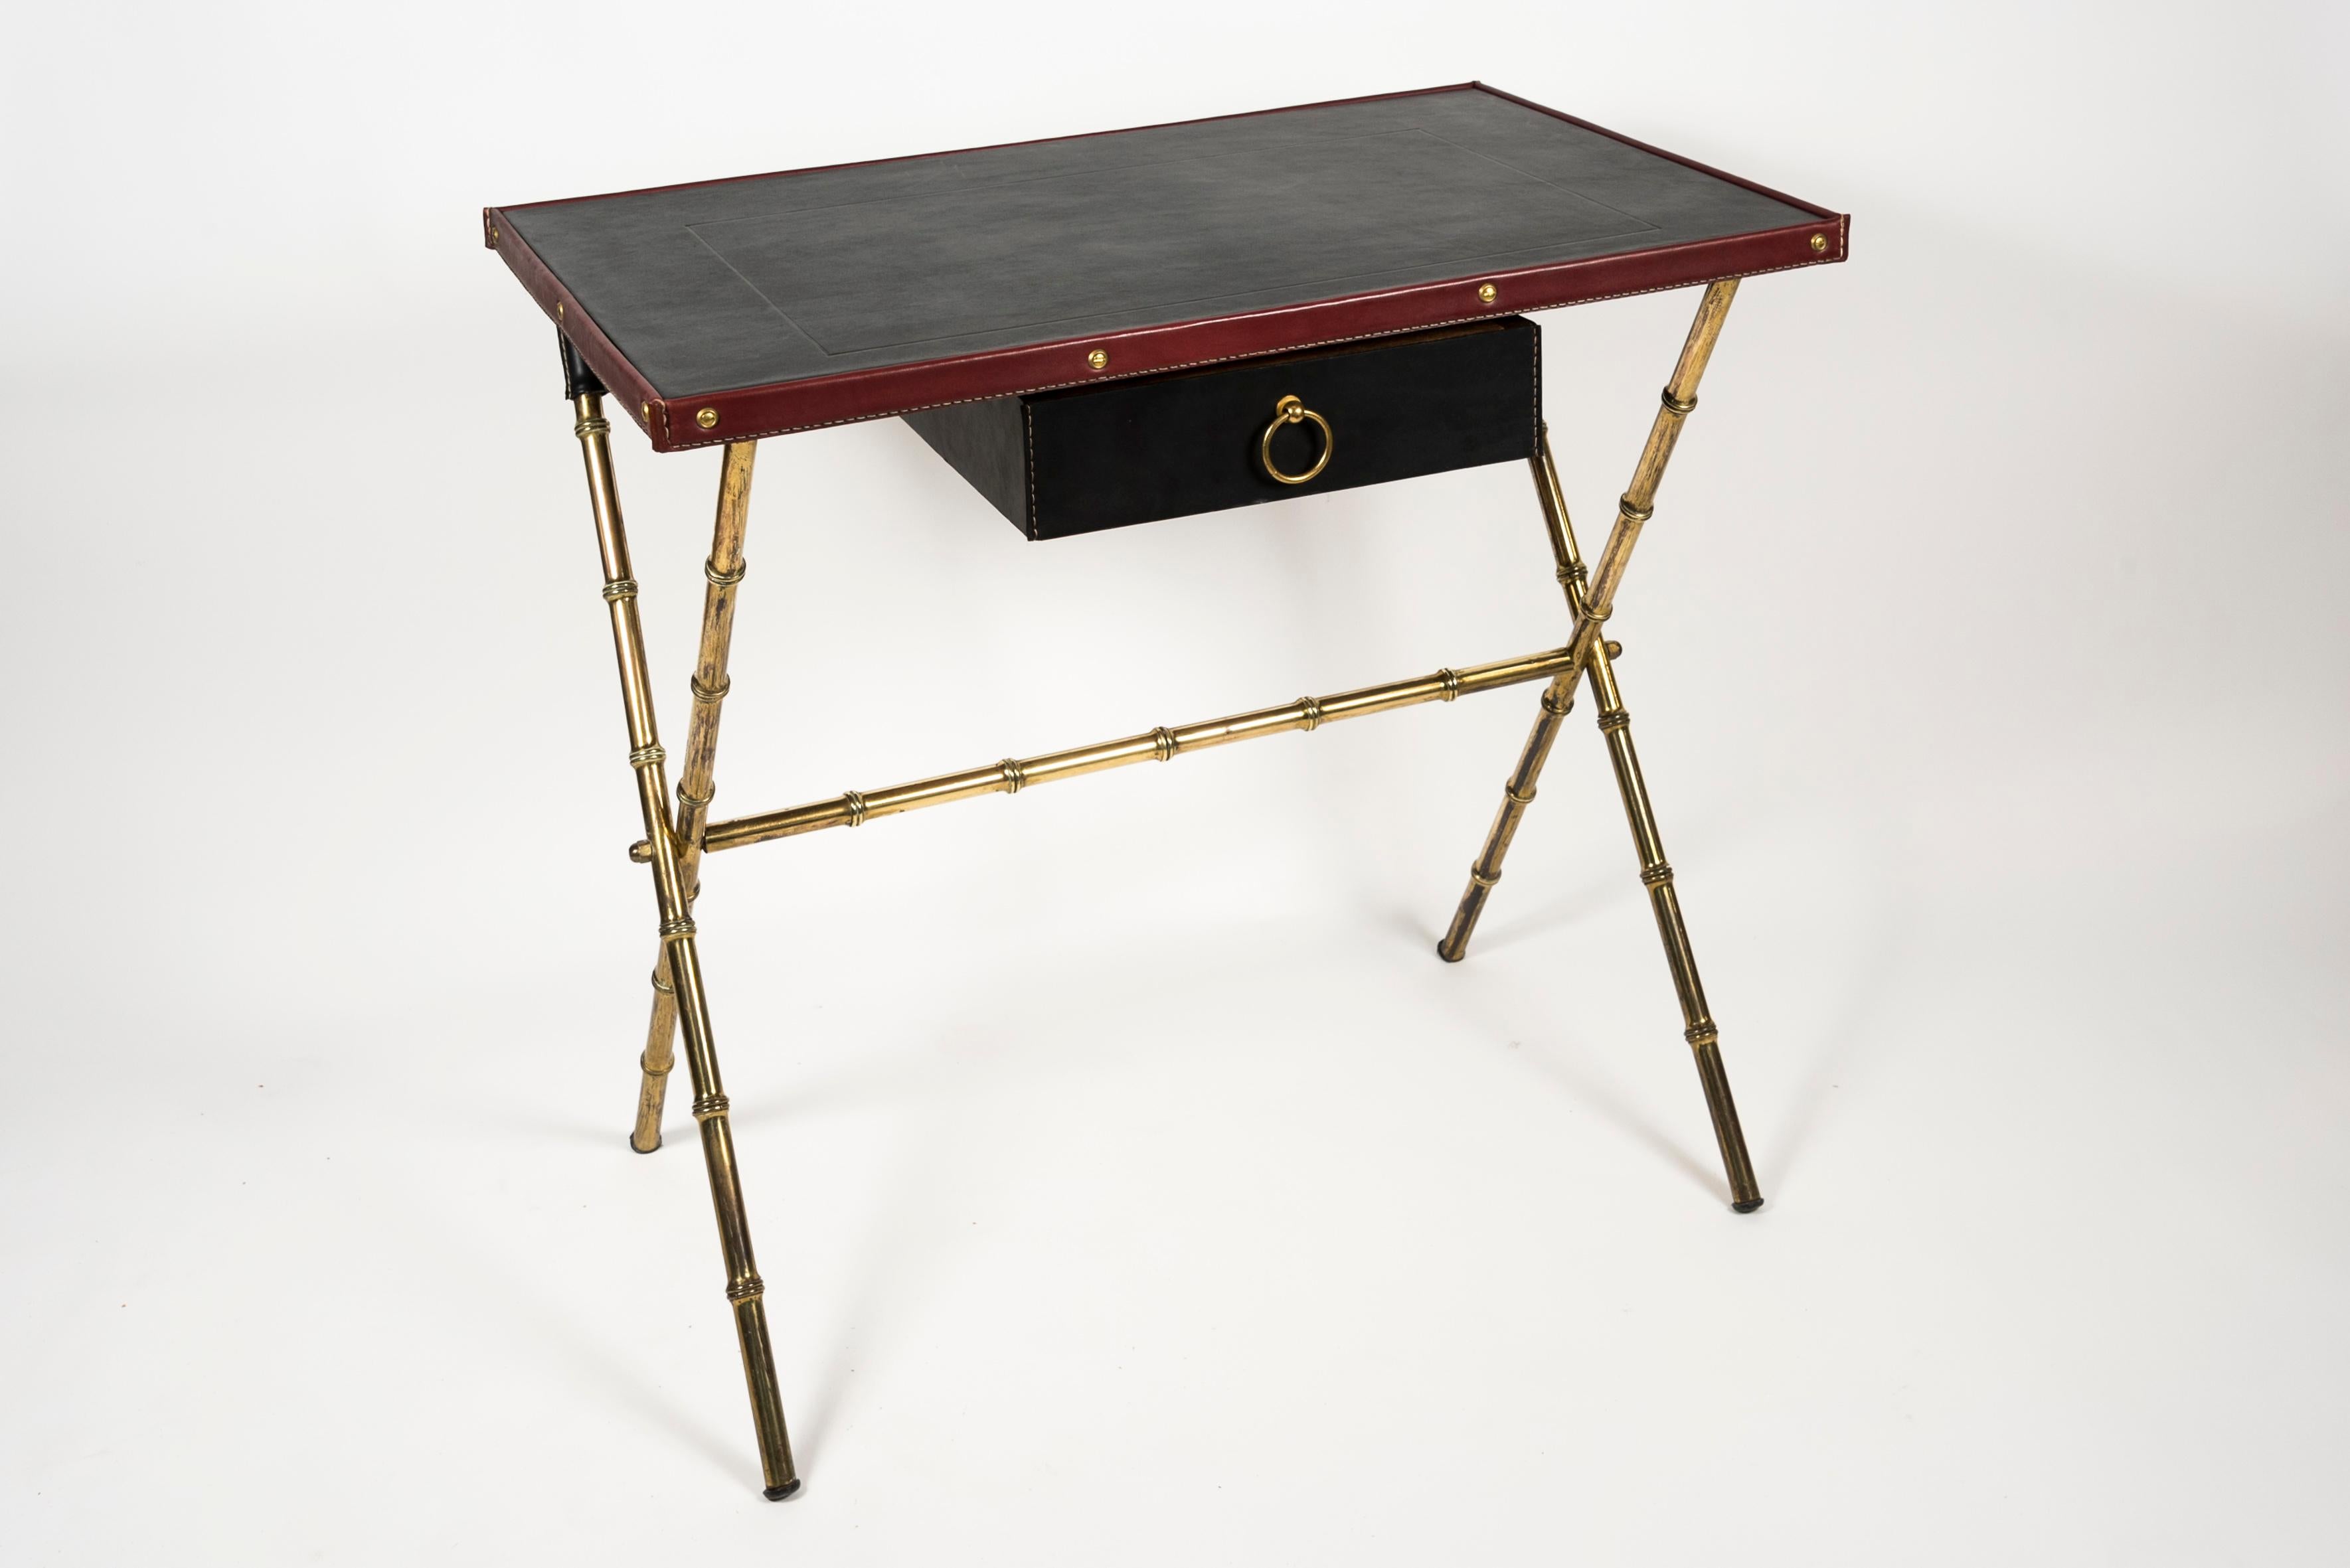 1950s Stitched leather desk with his stool.
All set designed by Jacques Adnet.